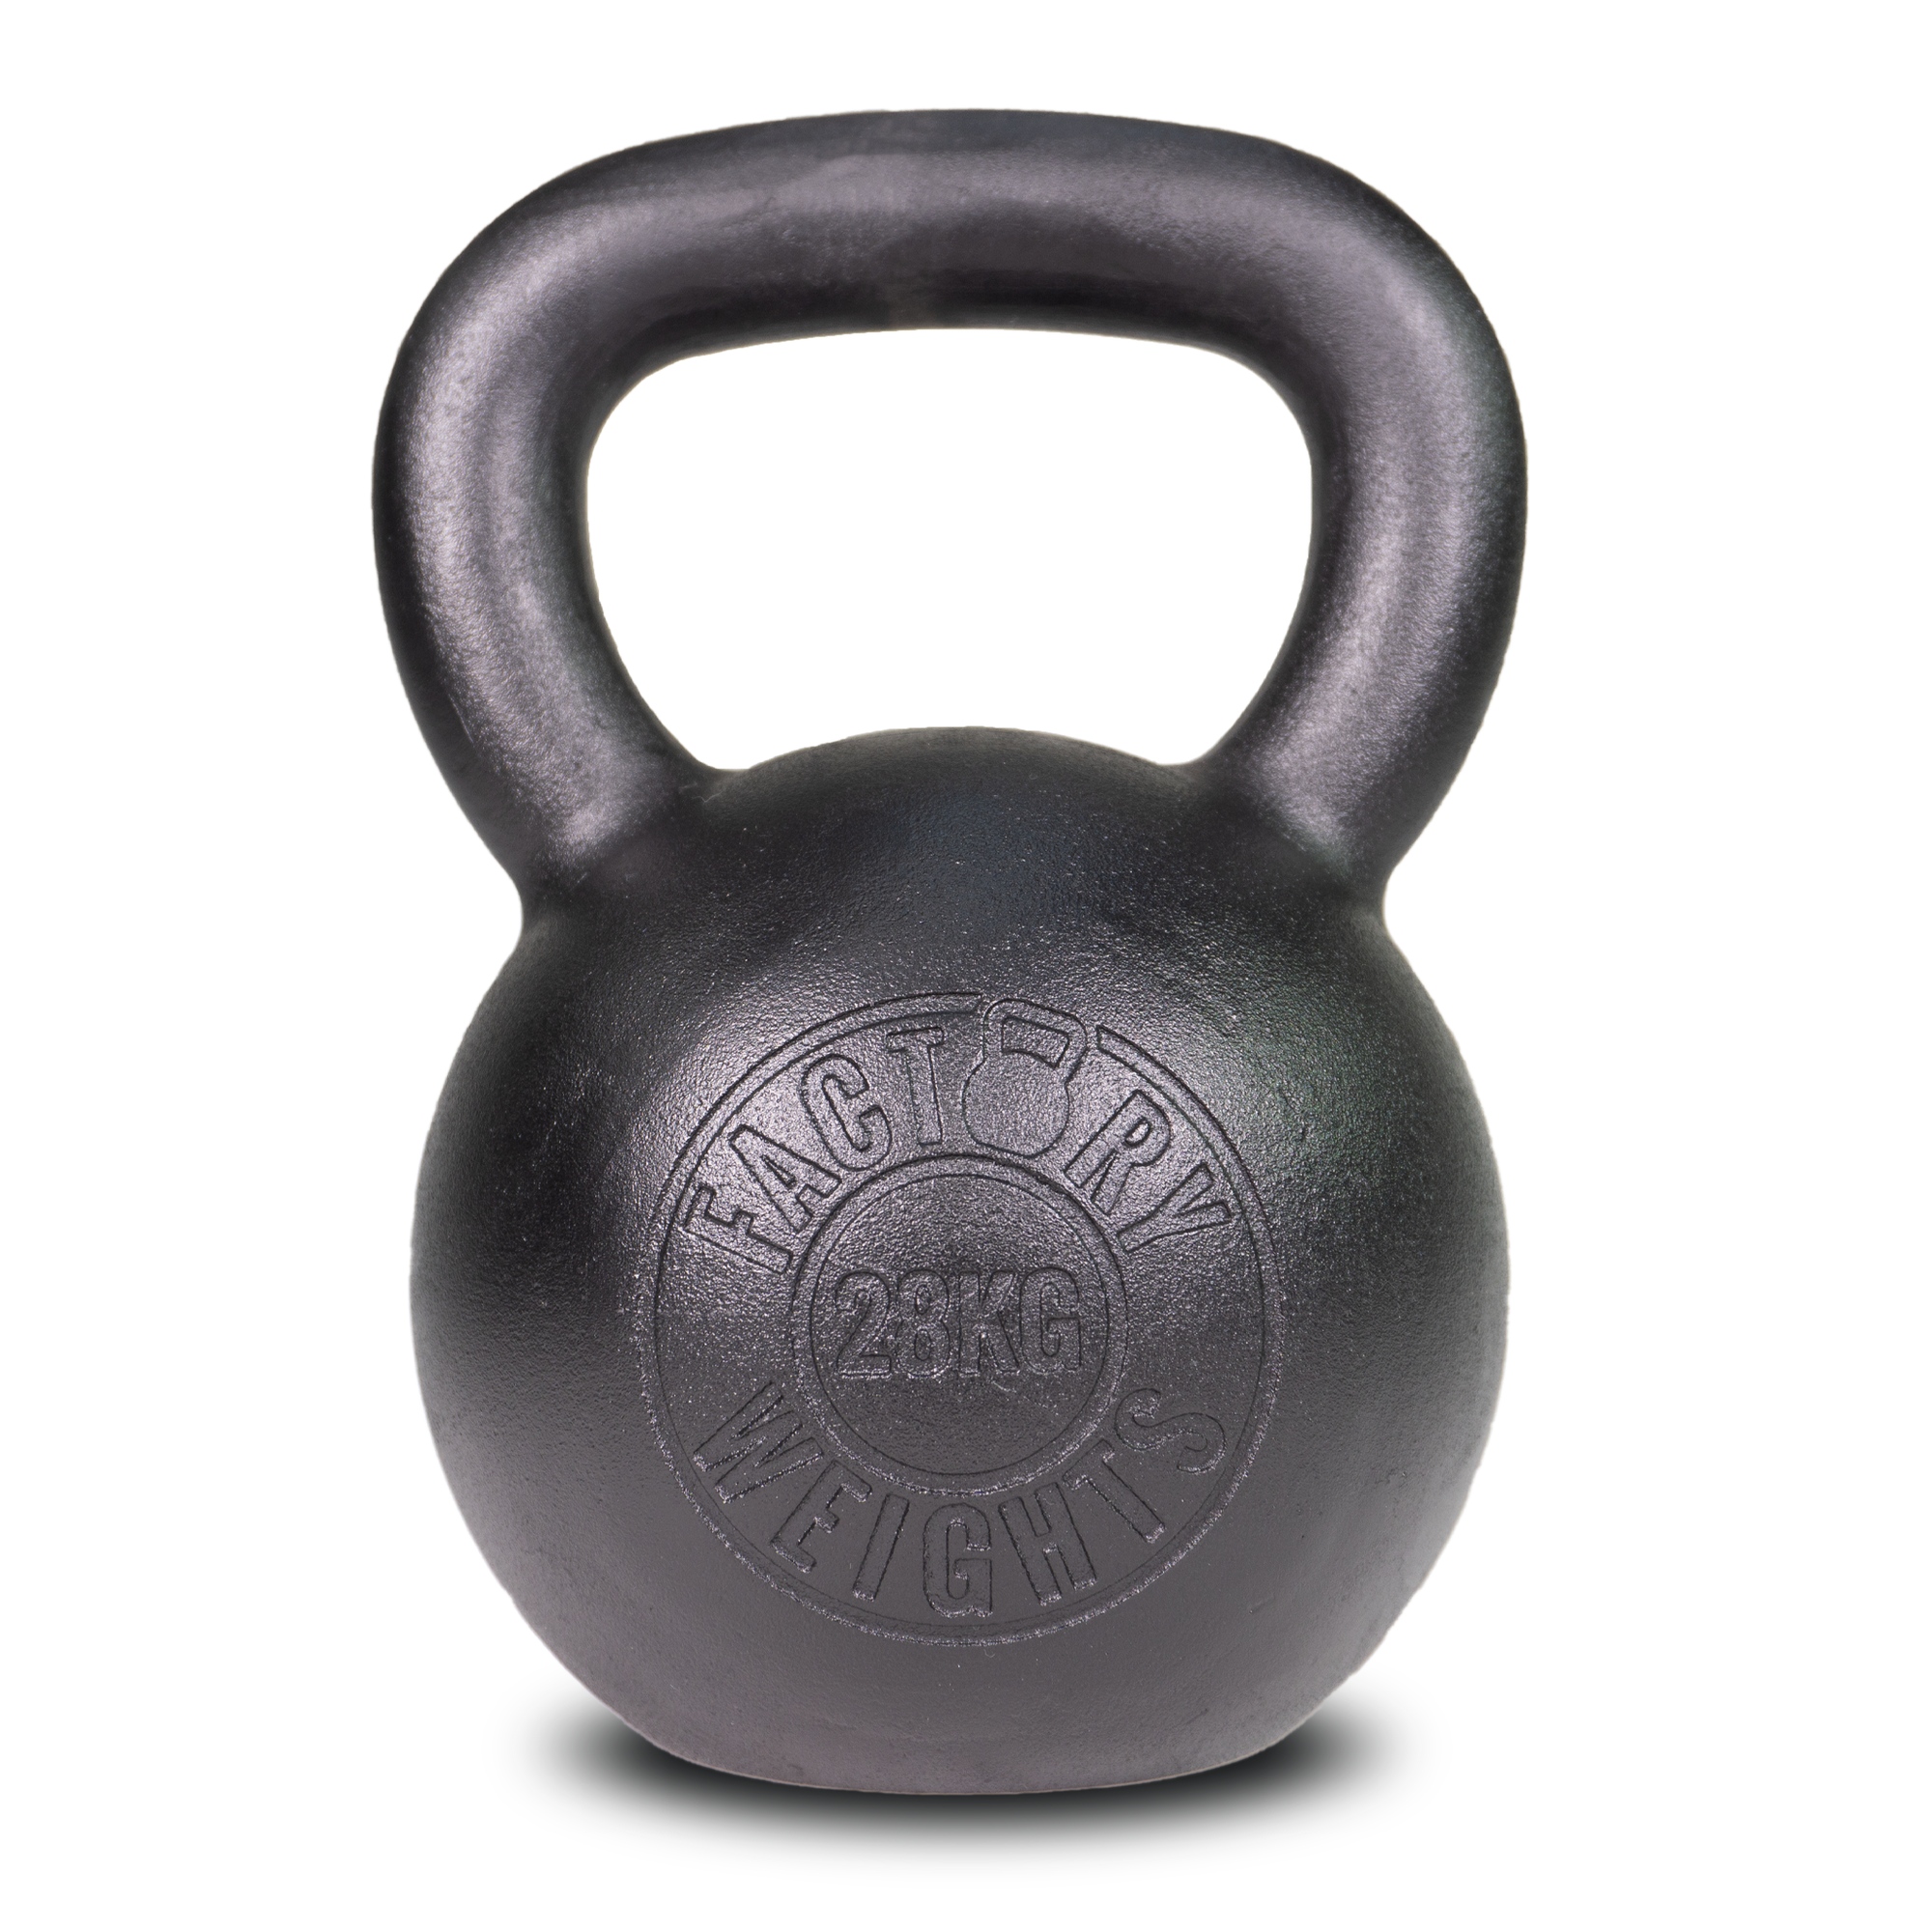 28kg Pro Forged Kettlebell